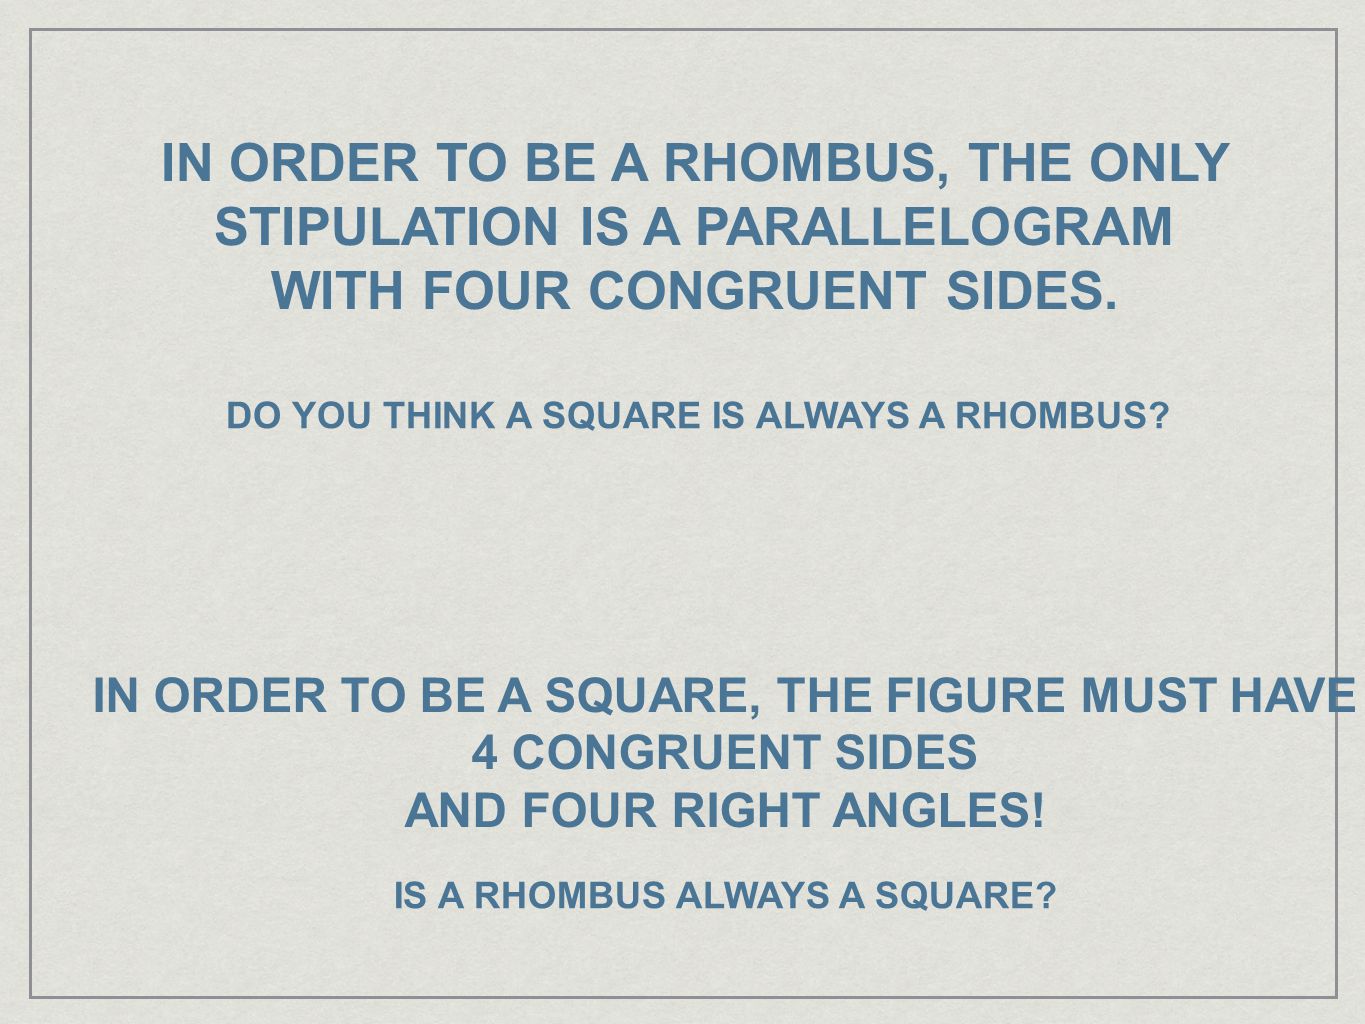 IN ORDER TO BE A RHOMBUS, THE ONLY STIPULATION IS A PARALLELOGRAM WITH FOUR CONGRUENT SIDES.